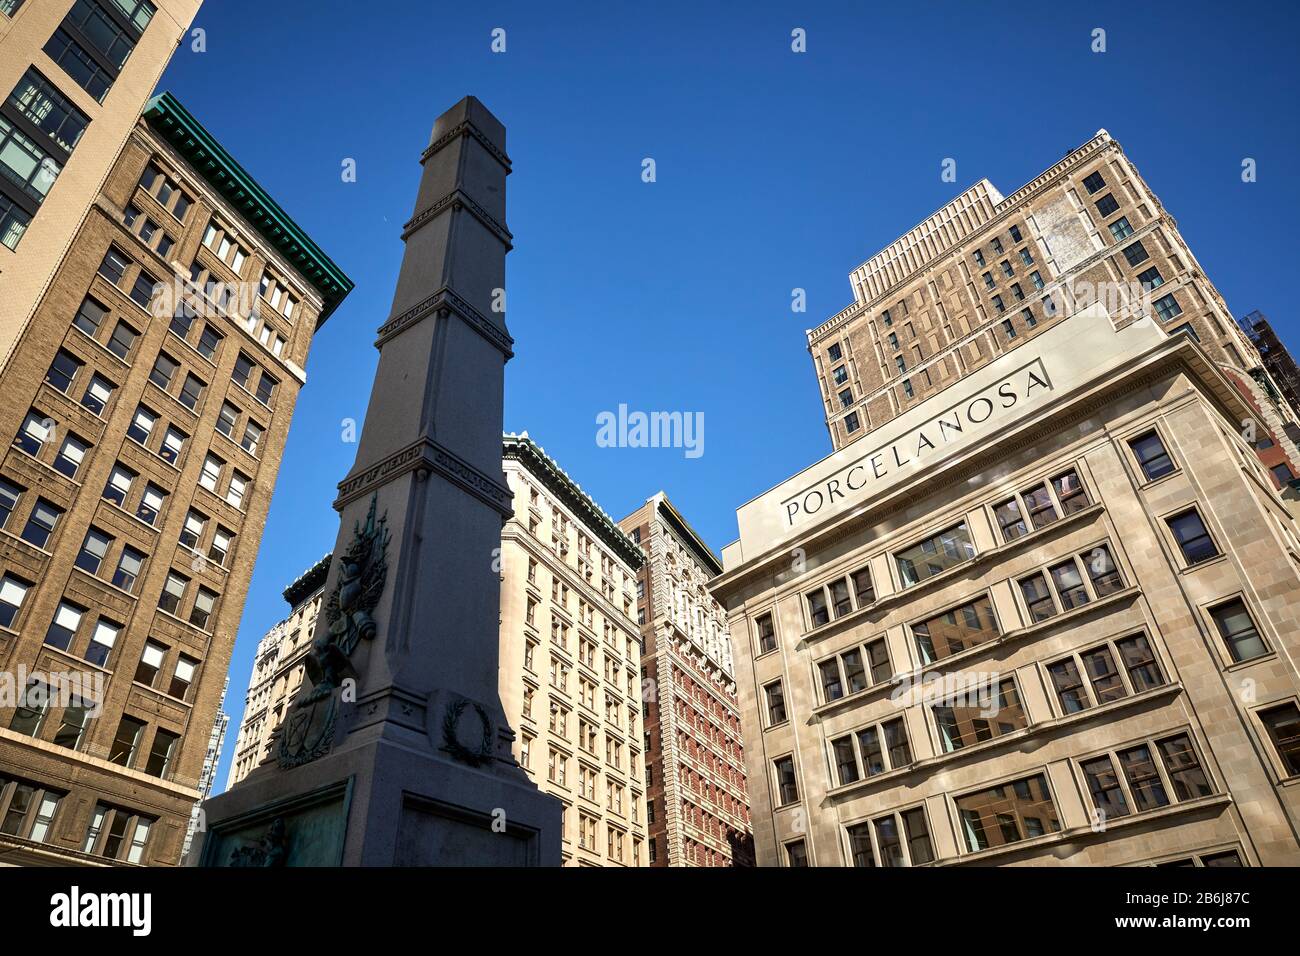 New York city Manhattan  neoclassical facade new PORCELANOSA Building on the Fifth Avenue Flatiron district and Major General Worth monument Stock Photo